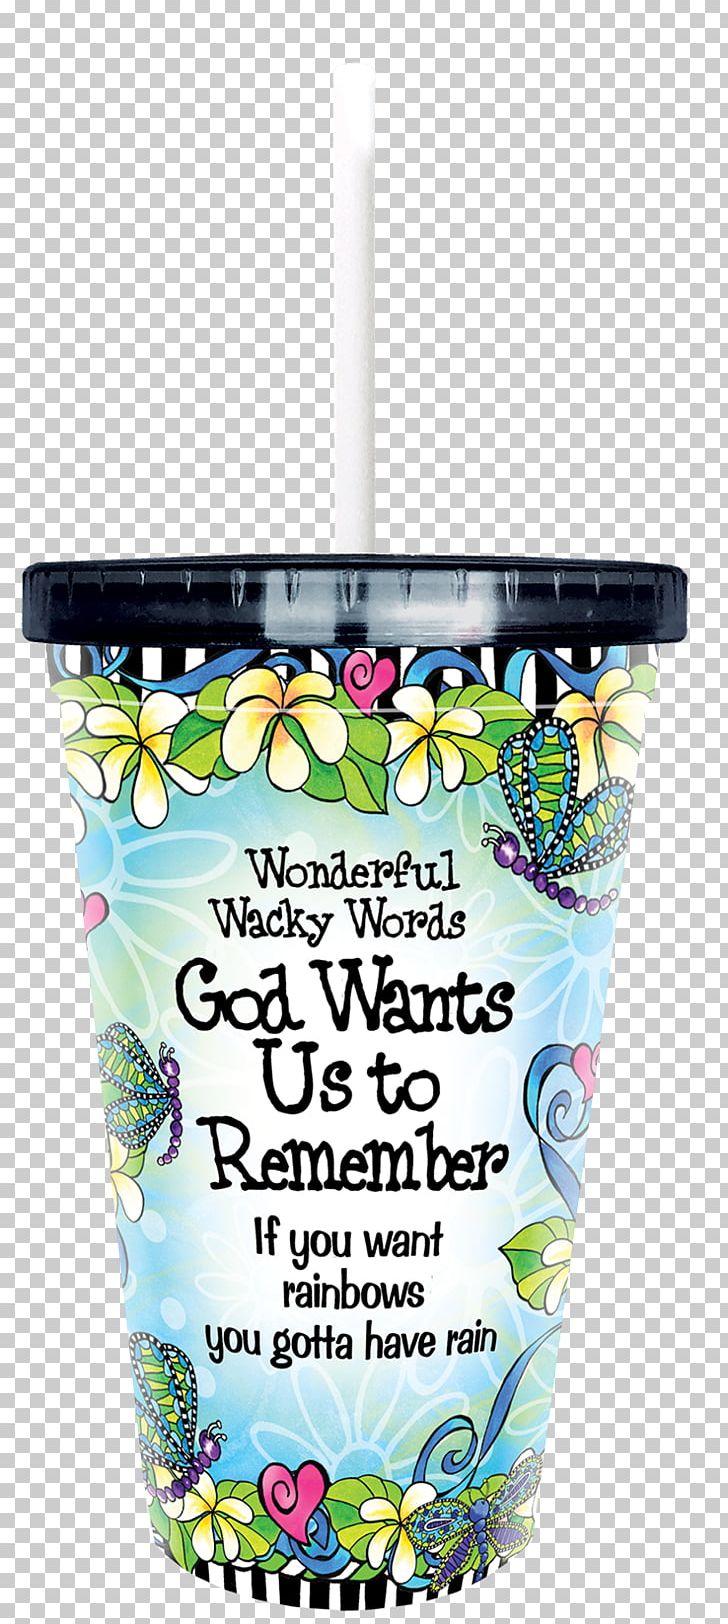 Wonderful Wacky Words God Wants You To Remember Cup Plastic Table-glass PNG, Clipart, Cup, Drinkware, Gift, God, Handwash Free PNG Download